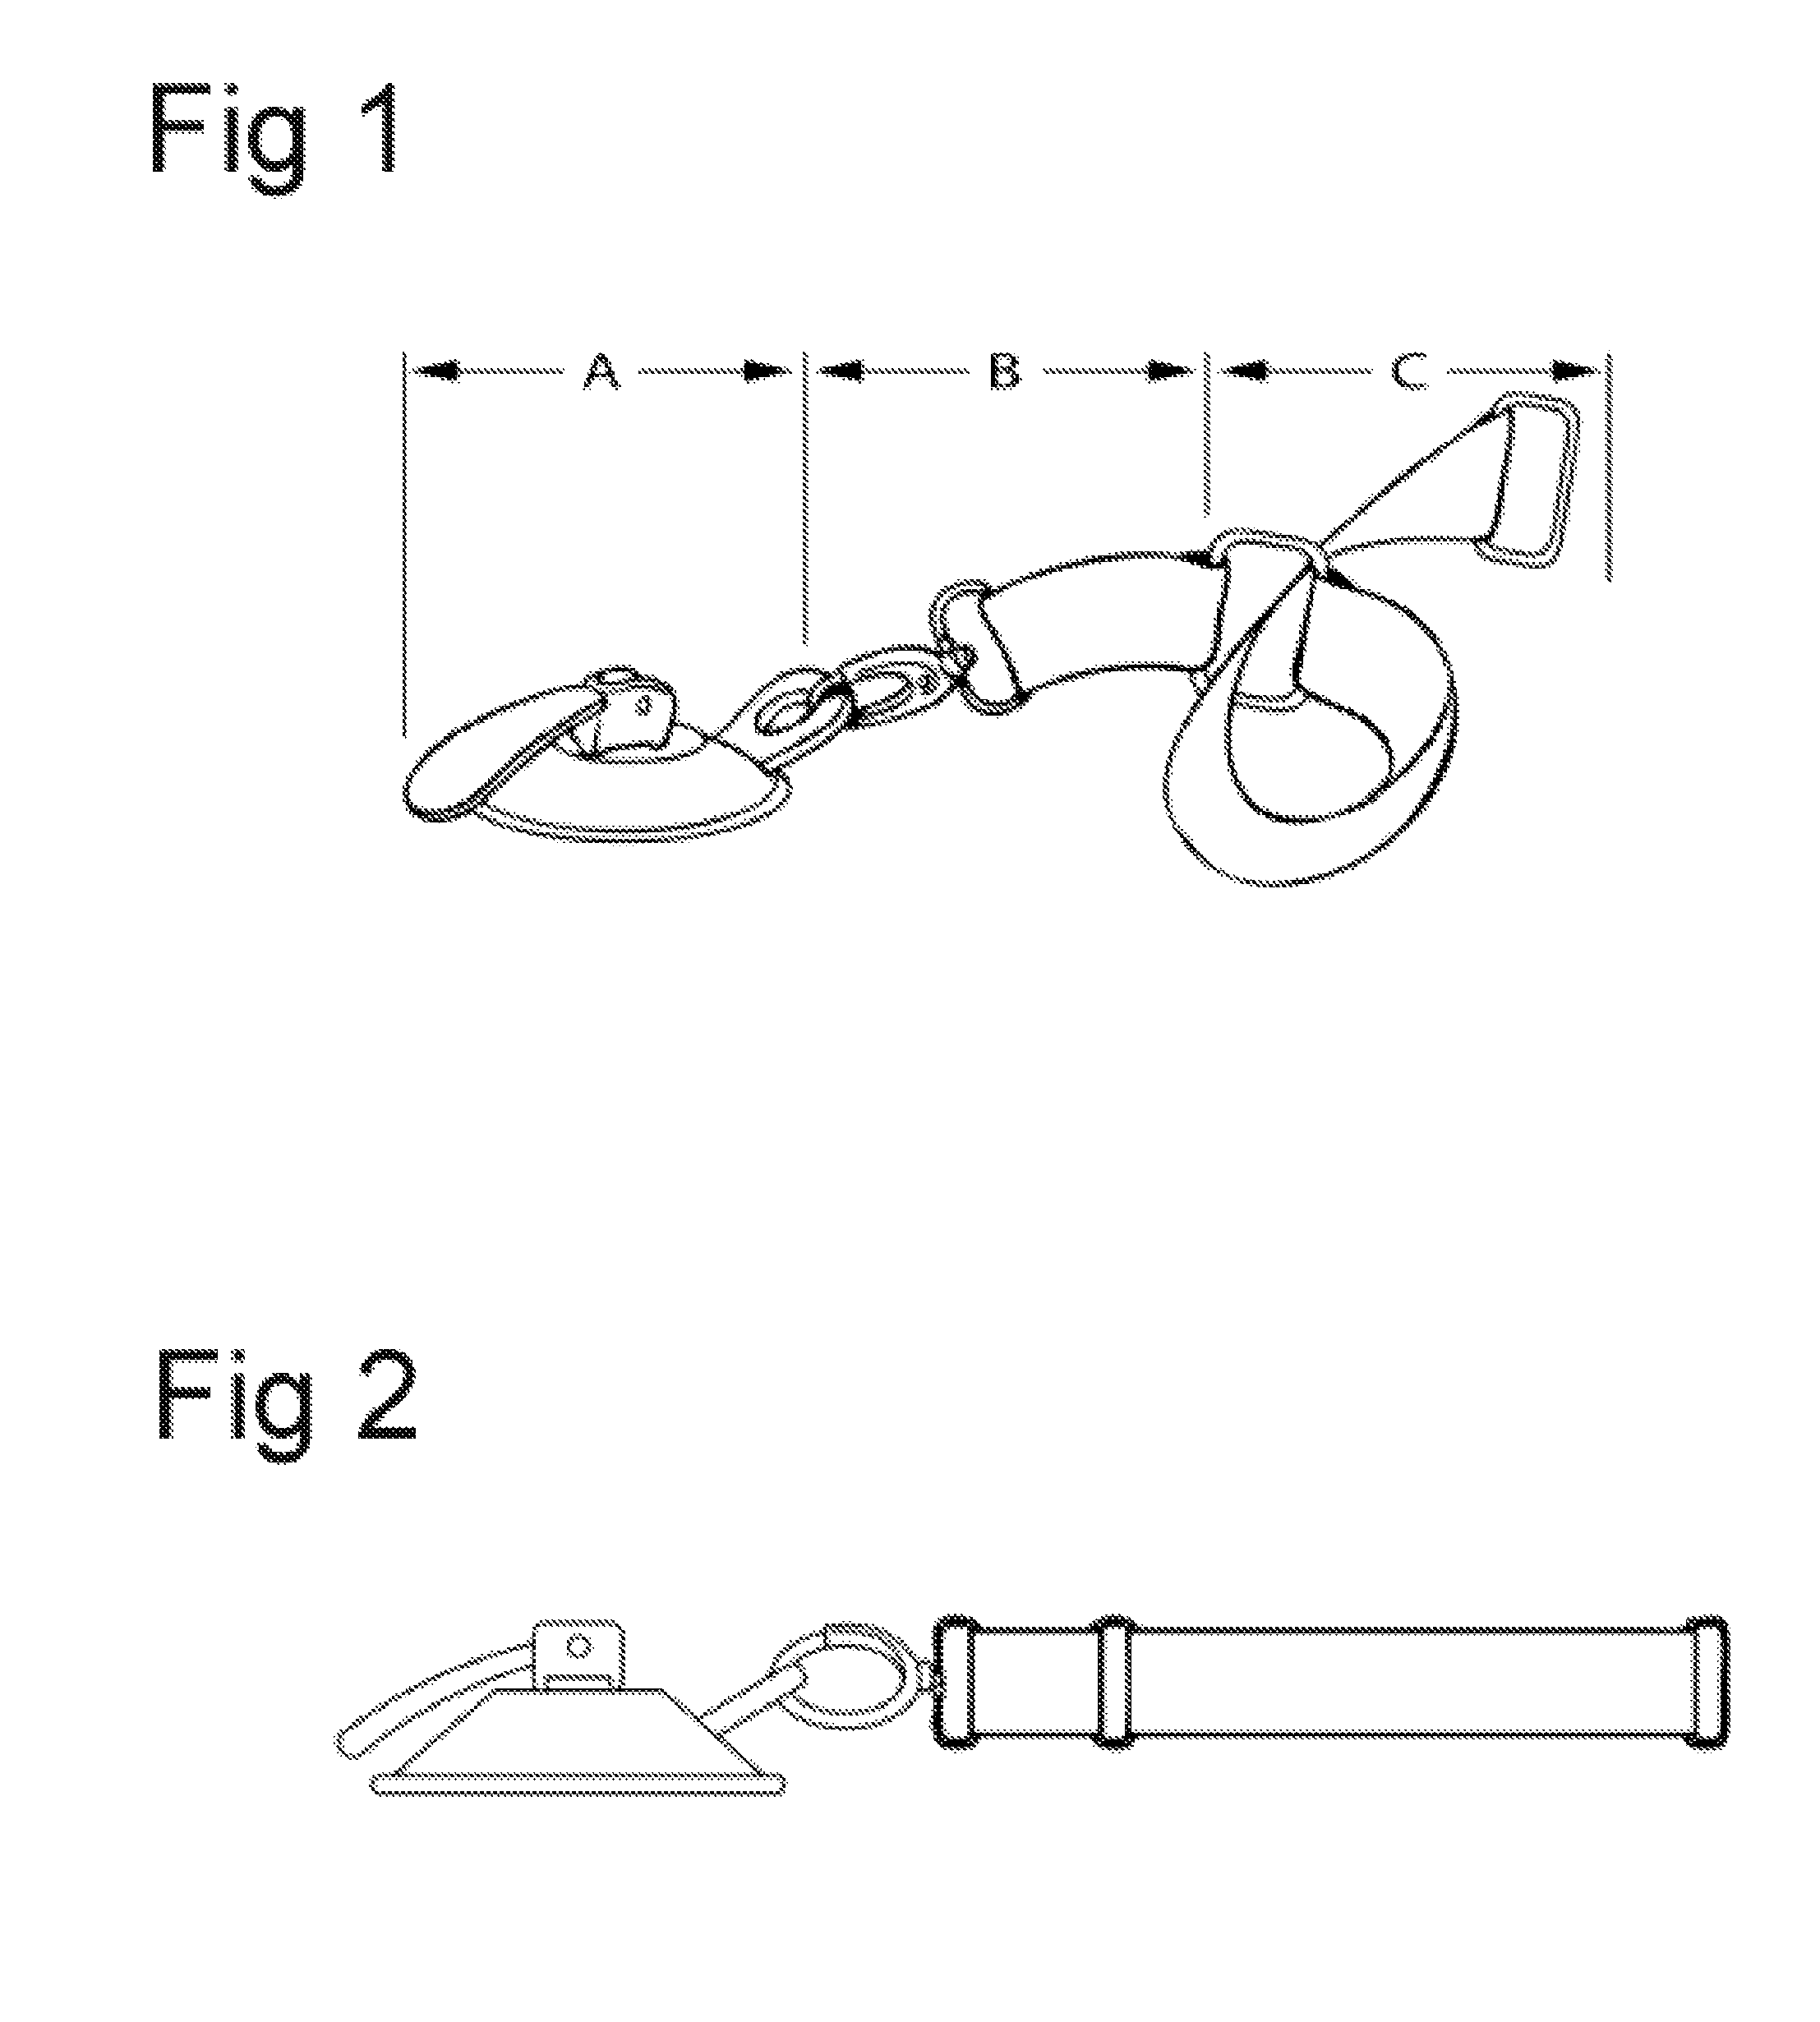 Pet leg restraining device during bathing, grooming, nail clipping, and exams